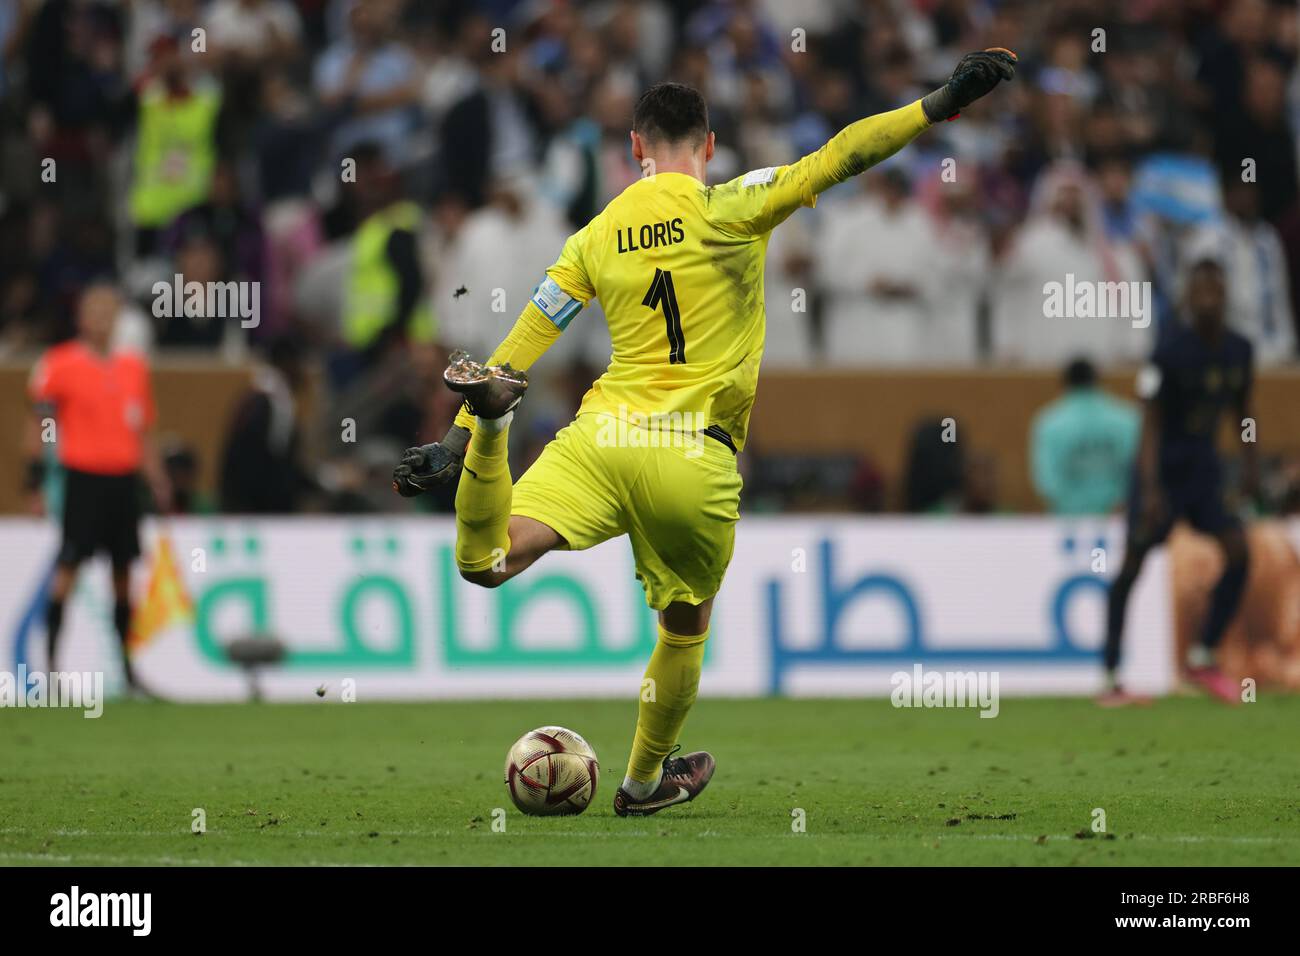 Lusail, Qatar, 18th. December 2022. Hugo Lloris during the match between Argentina vs. France, Match 64, Final match of the Fifa World Cup Qatar 2022. Stock Photo